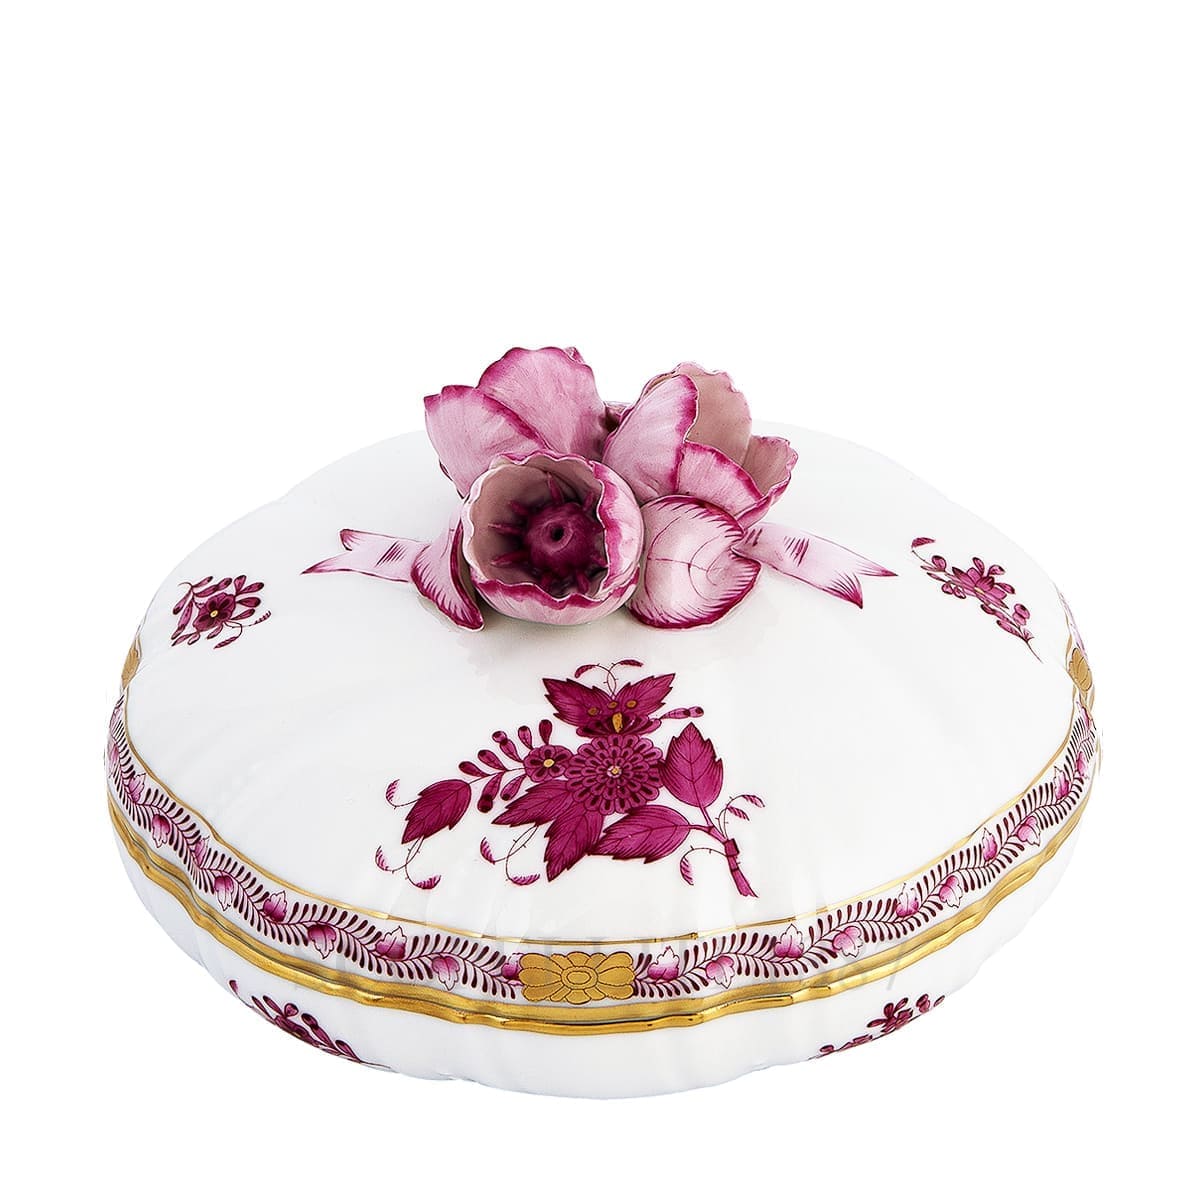 herend porcelain apponyi candy box pink with rose